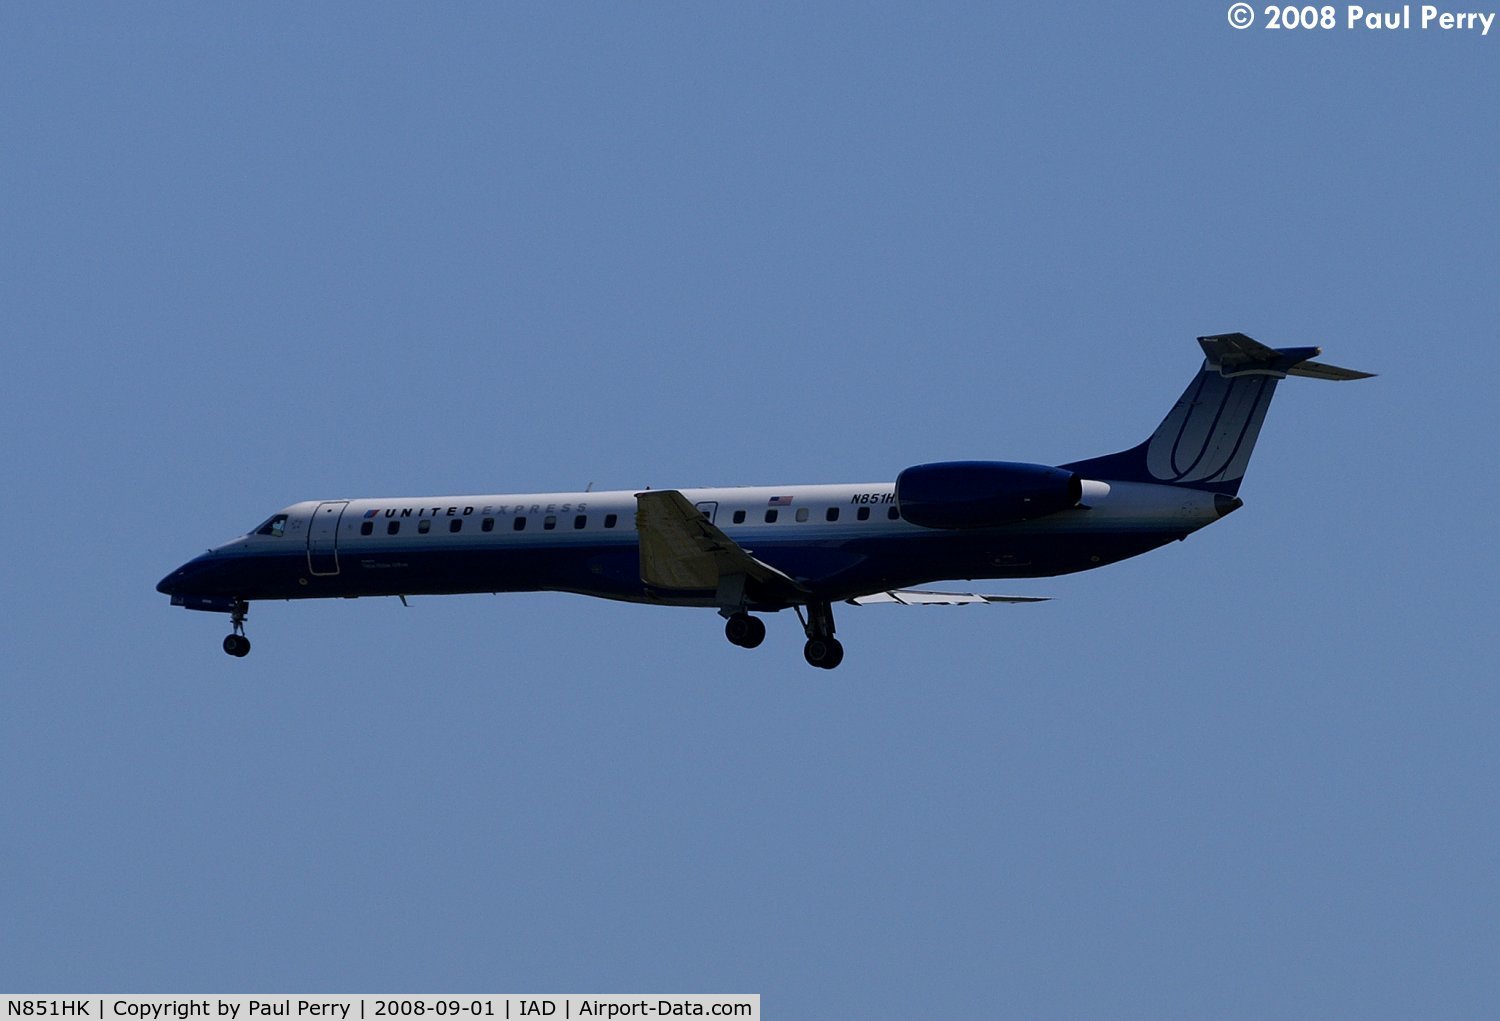 N851HK, 2000 Embraer EMB-145LR C/N 145340, An angle like this makes those wings look tiny